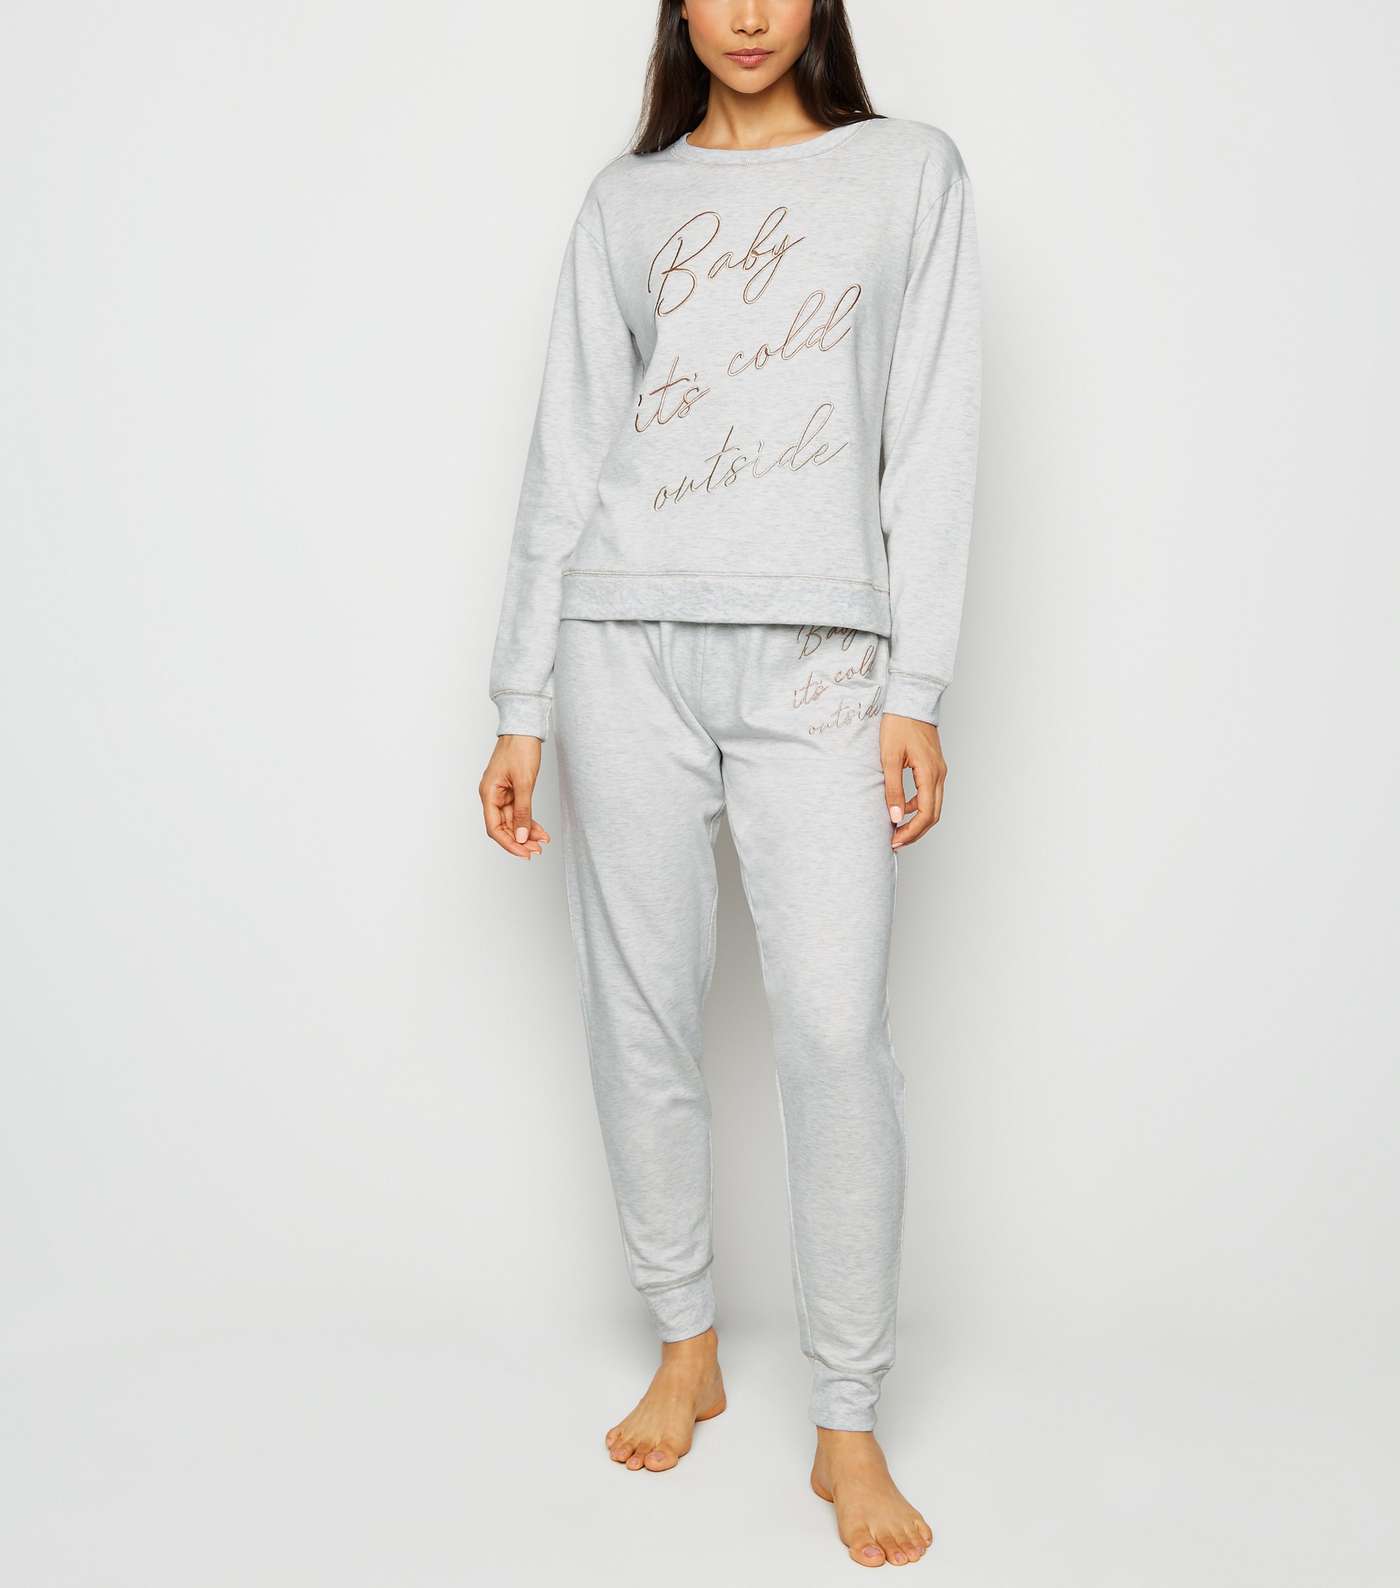 Pale Grey Baby It's Cold Outside Pyjama Joggers